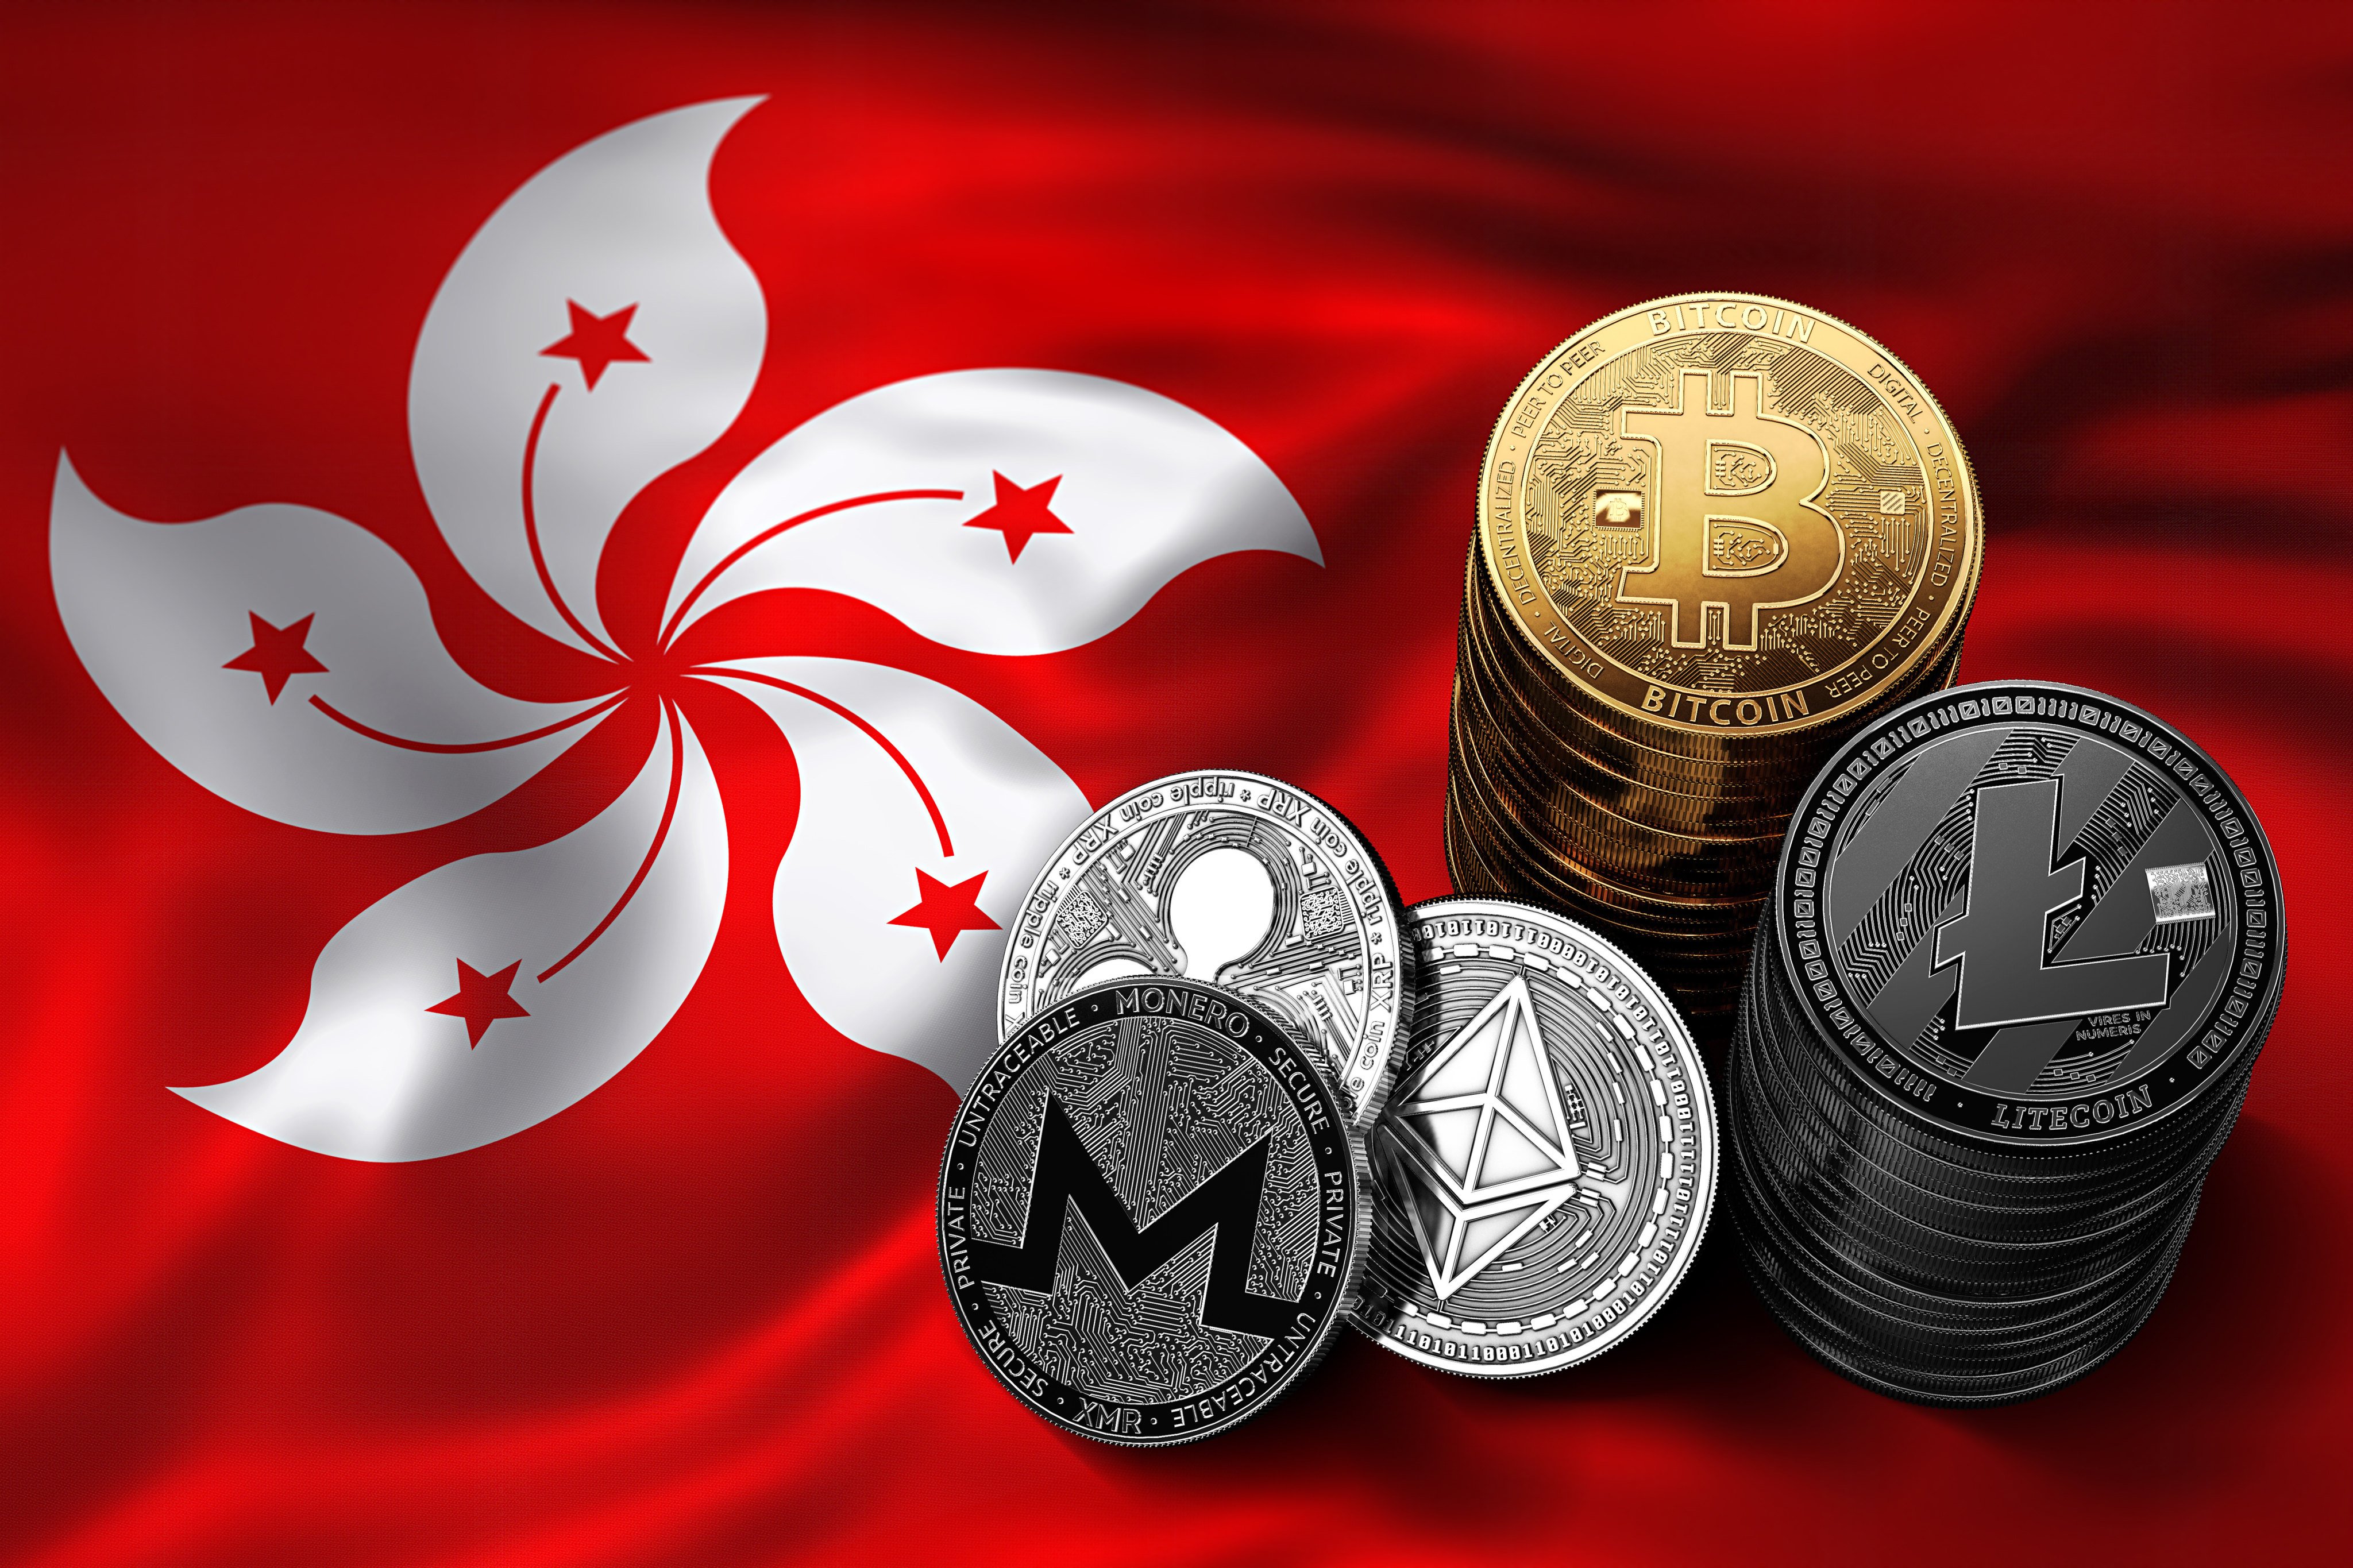 Stacks of cryptocurrency coin representations are set against the backdrop of the Hong Kong flag. Photo: Shutterstock Images